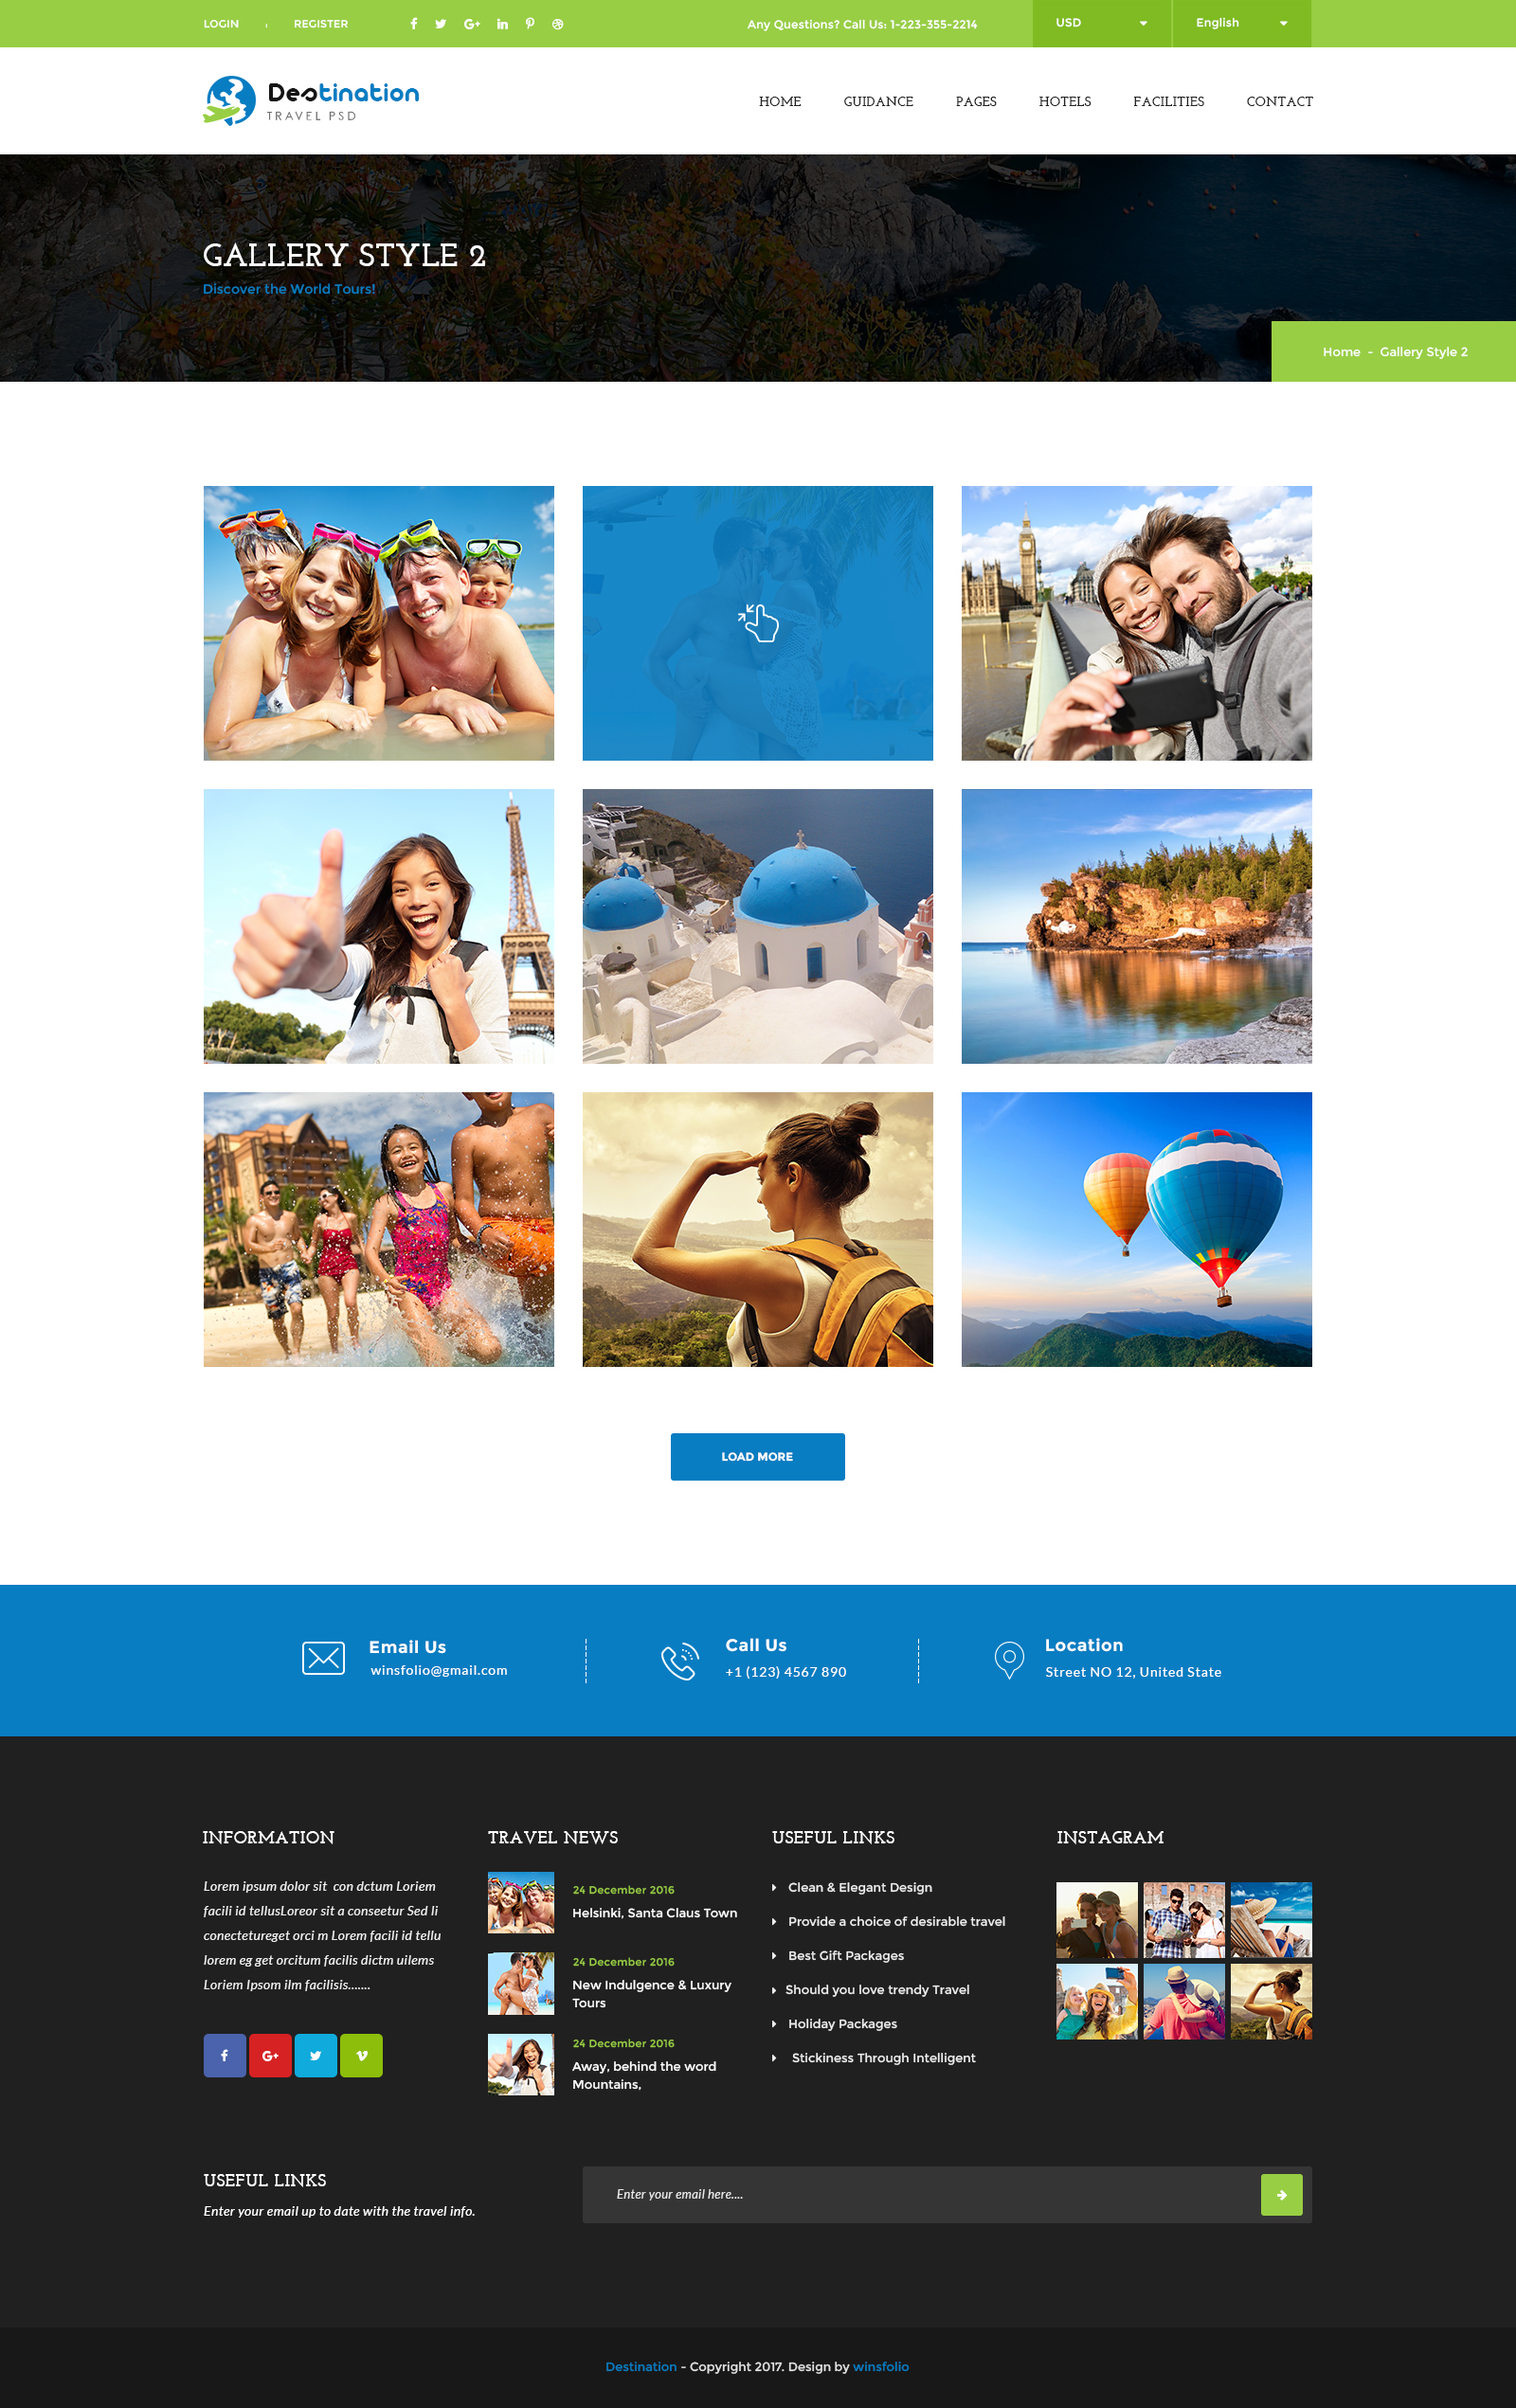 Destination - Hotels, Tours and Travel Booking PSD Template